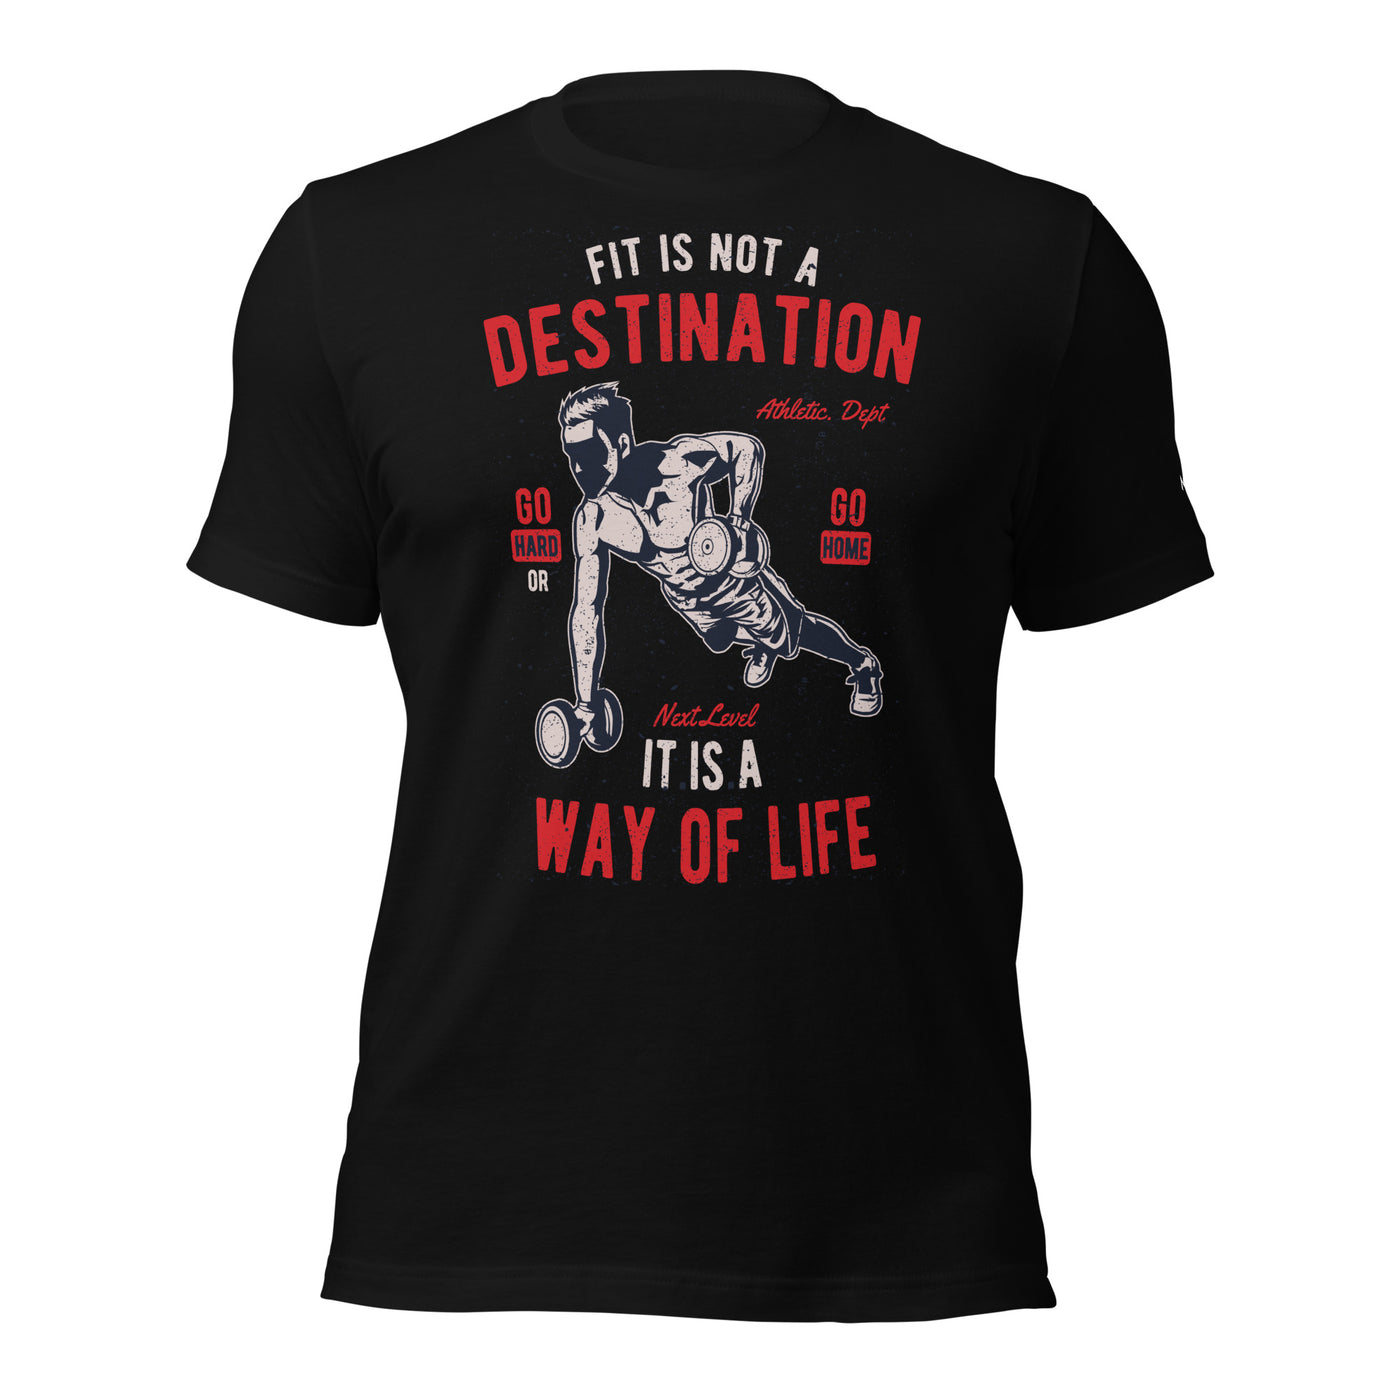 Fit is not a destination: it is a way of life - Unisex t-shirt